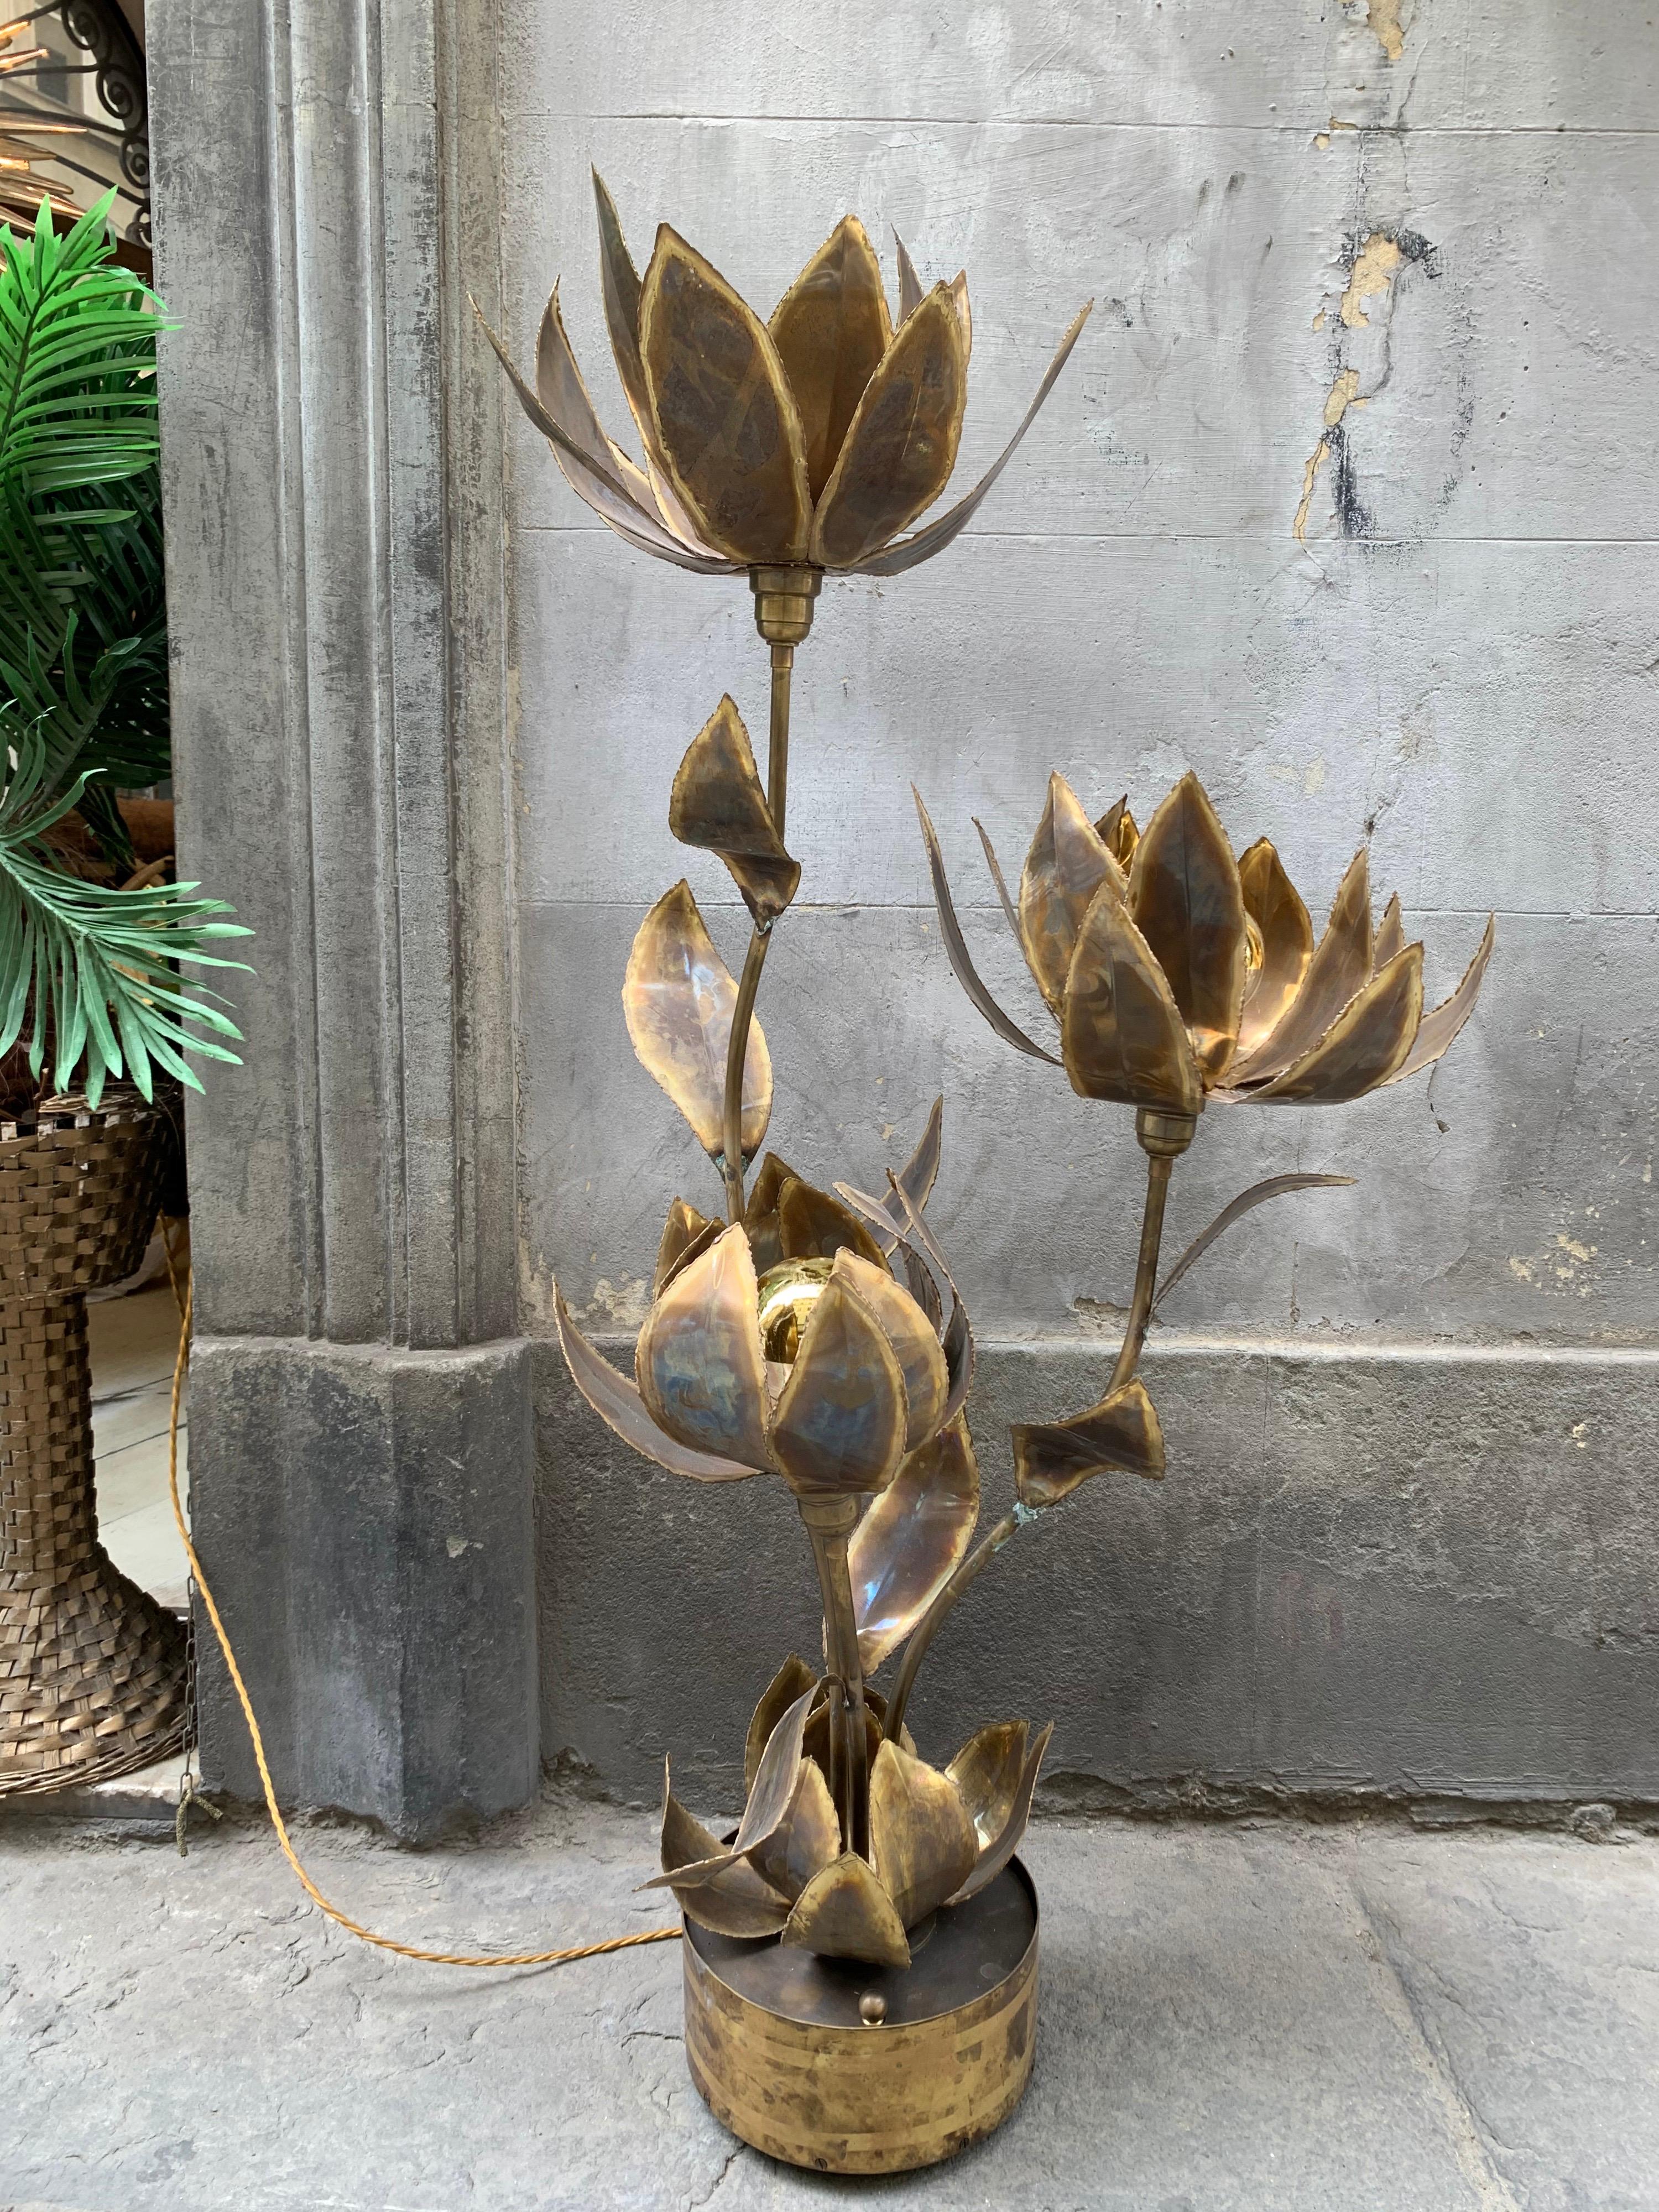 Maison Jansen vintage flowers brass floor lamp. This highly decorative floor lamp is formed into sharp leaves and flowers and it has three light bulbs.